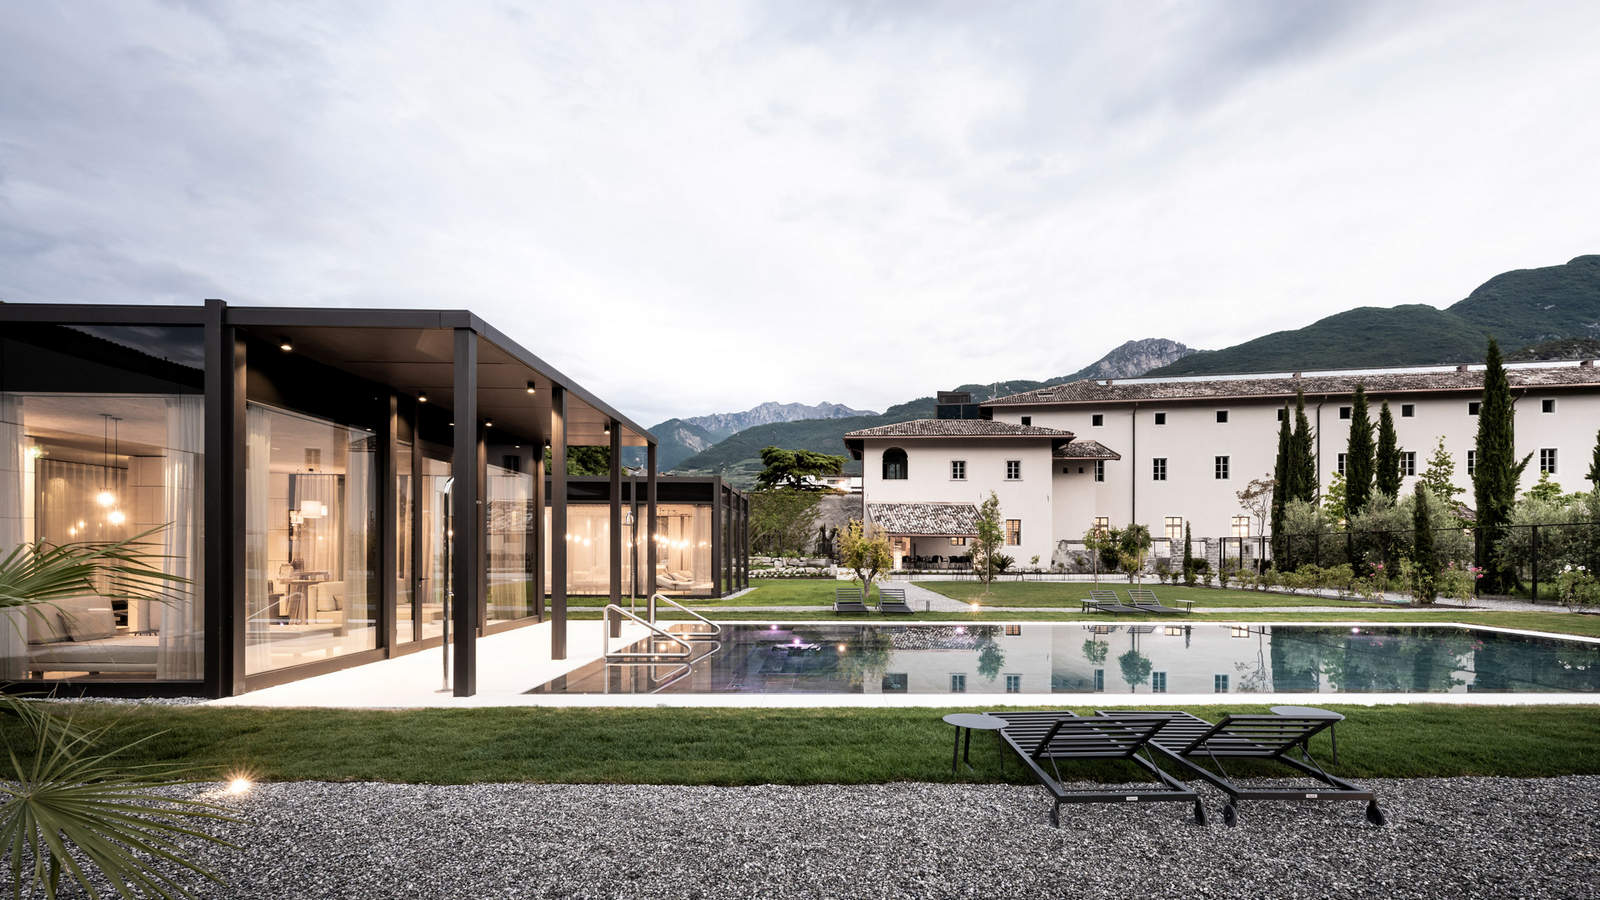 This 17th-century monastery in Italy has been transformed into a luxe hotel and spa